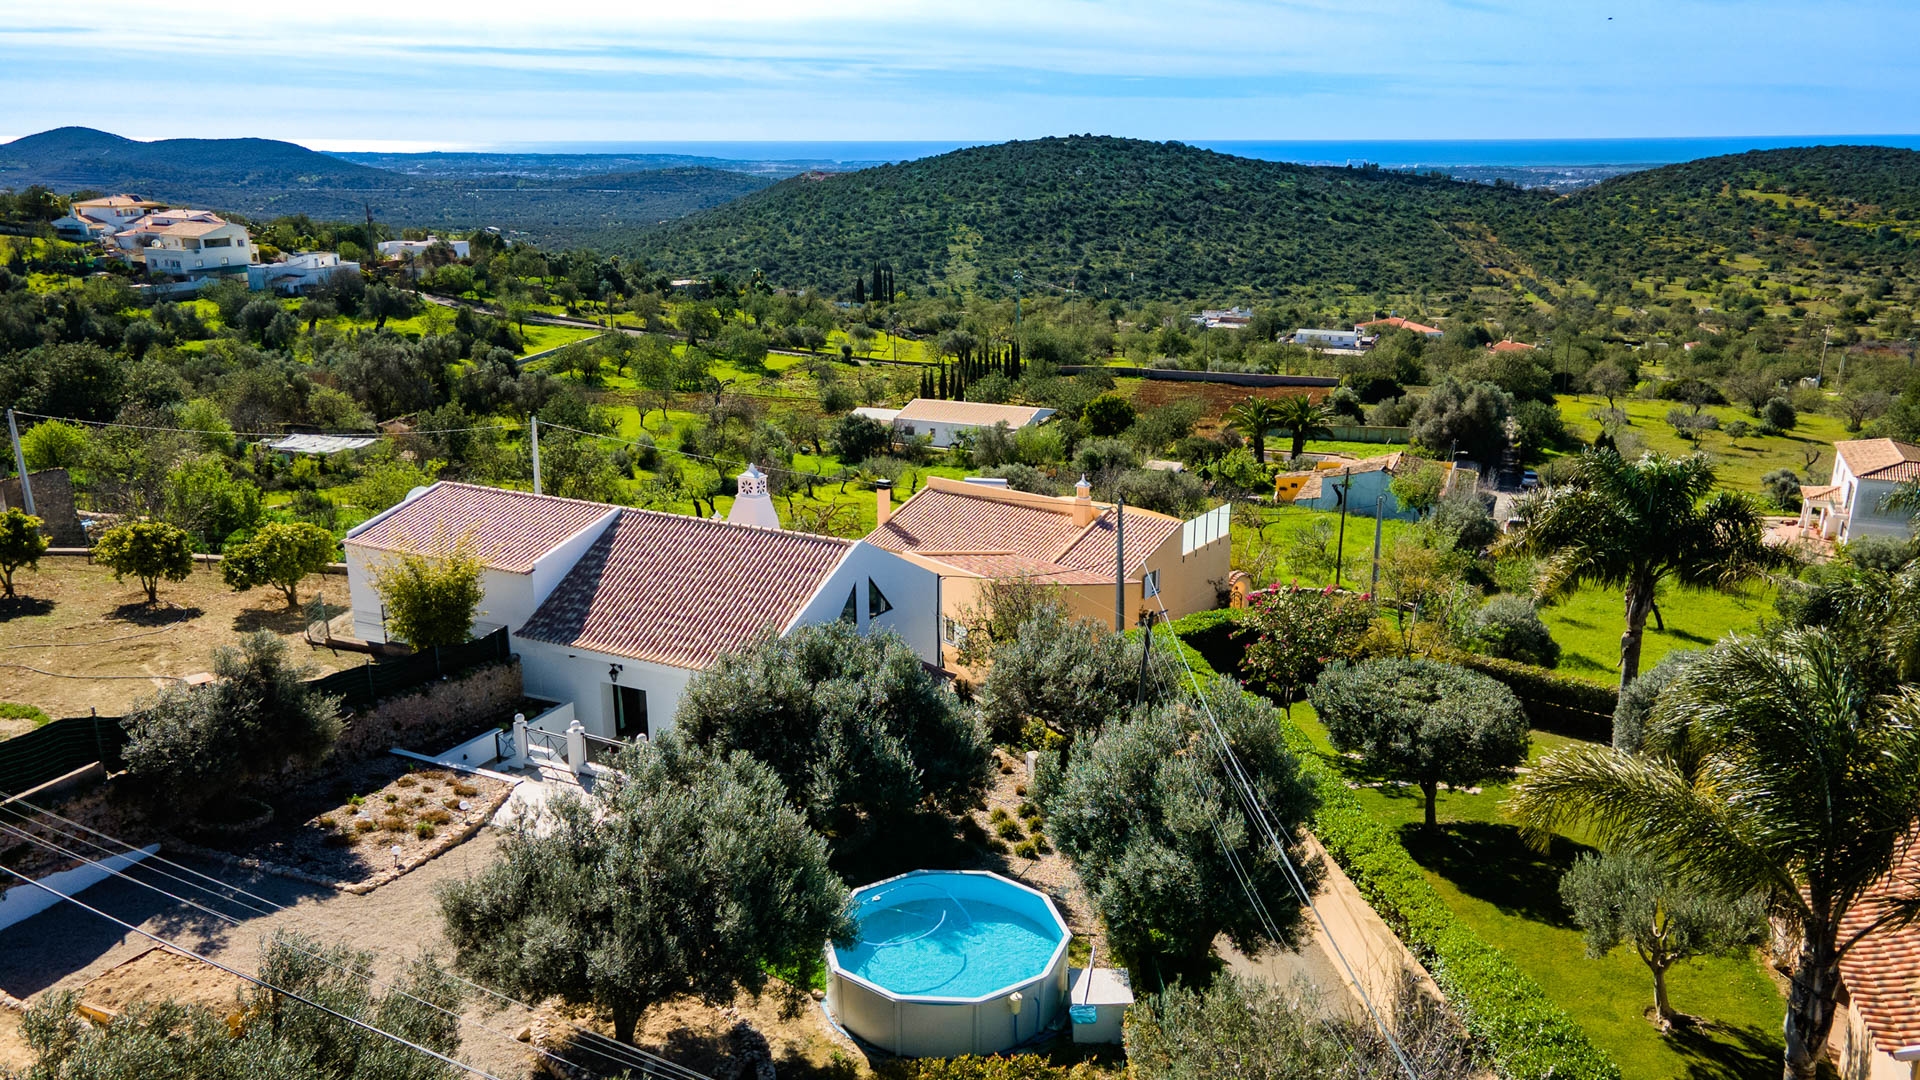 Newly renovated 3 Bedroom Villa with Sea Views, Parragil, Loulé | VM1874 This newly renovated 3 bedroom villa in the hills between Loulé and Boliqueime offers spectacular panoramic sea and country views from its terrace.